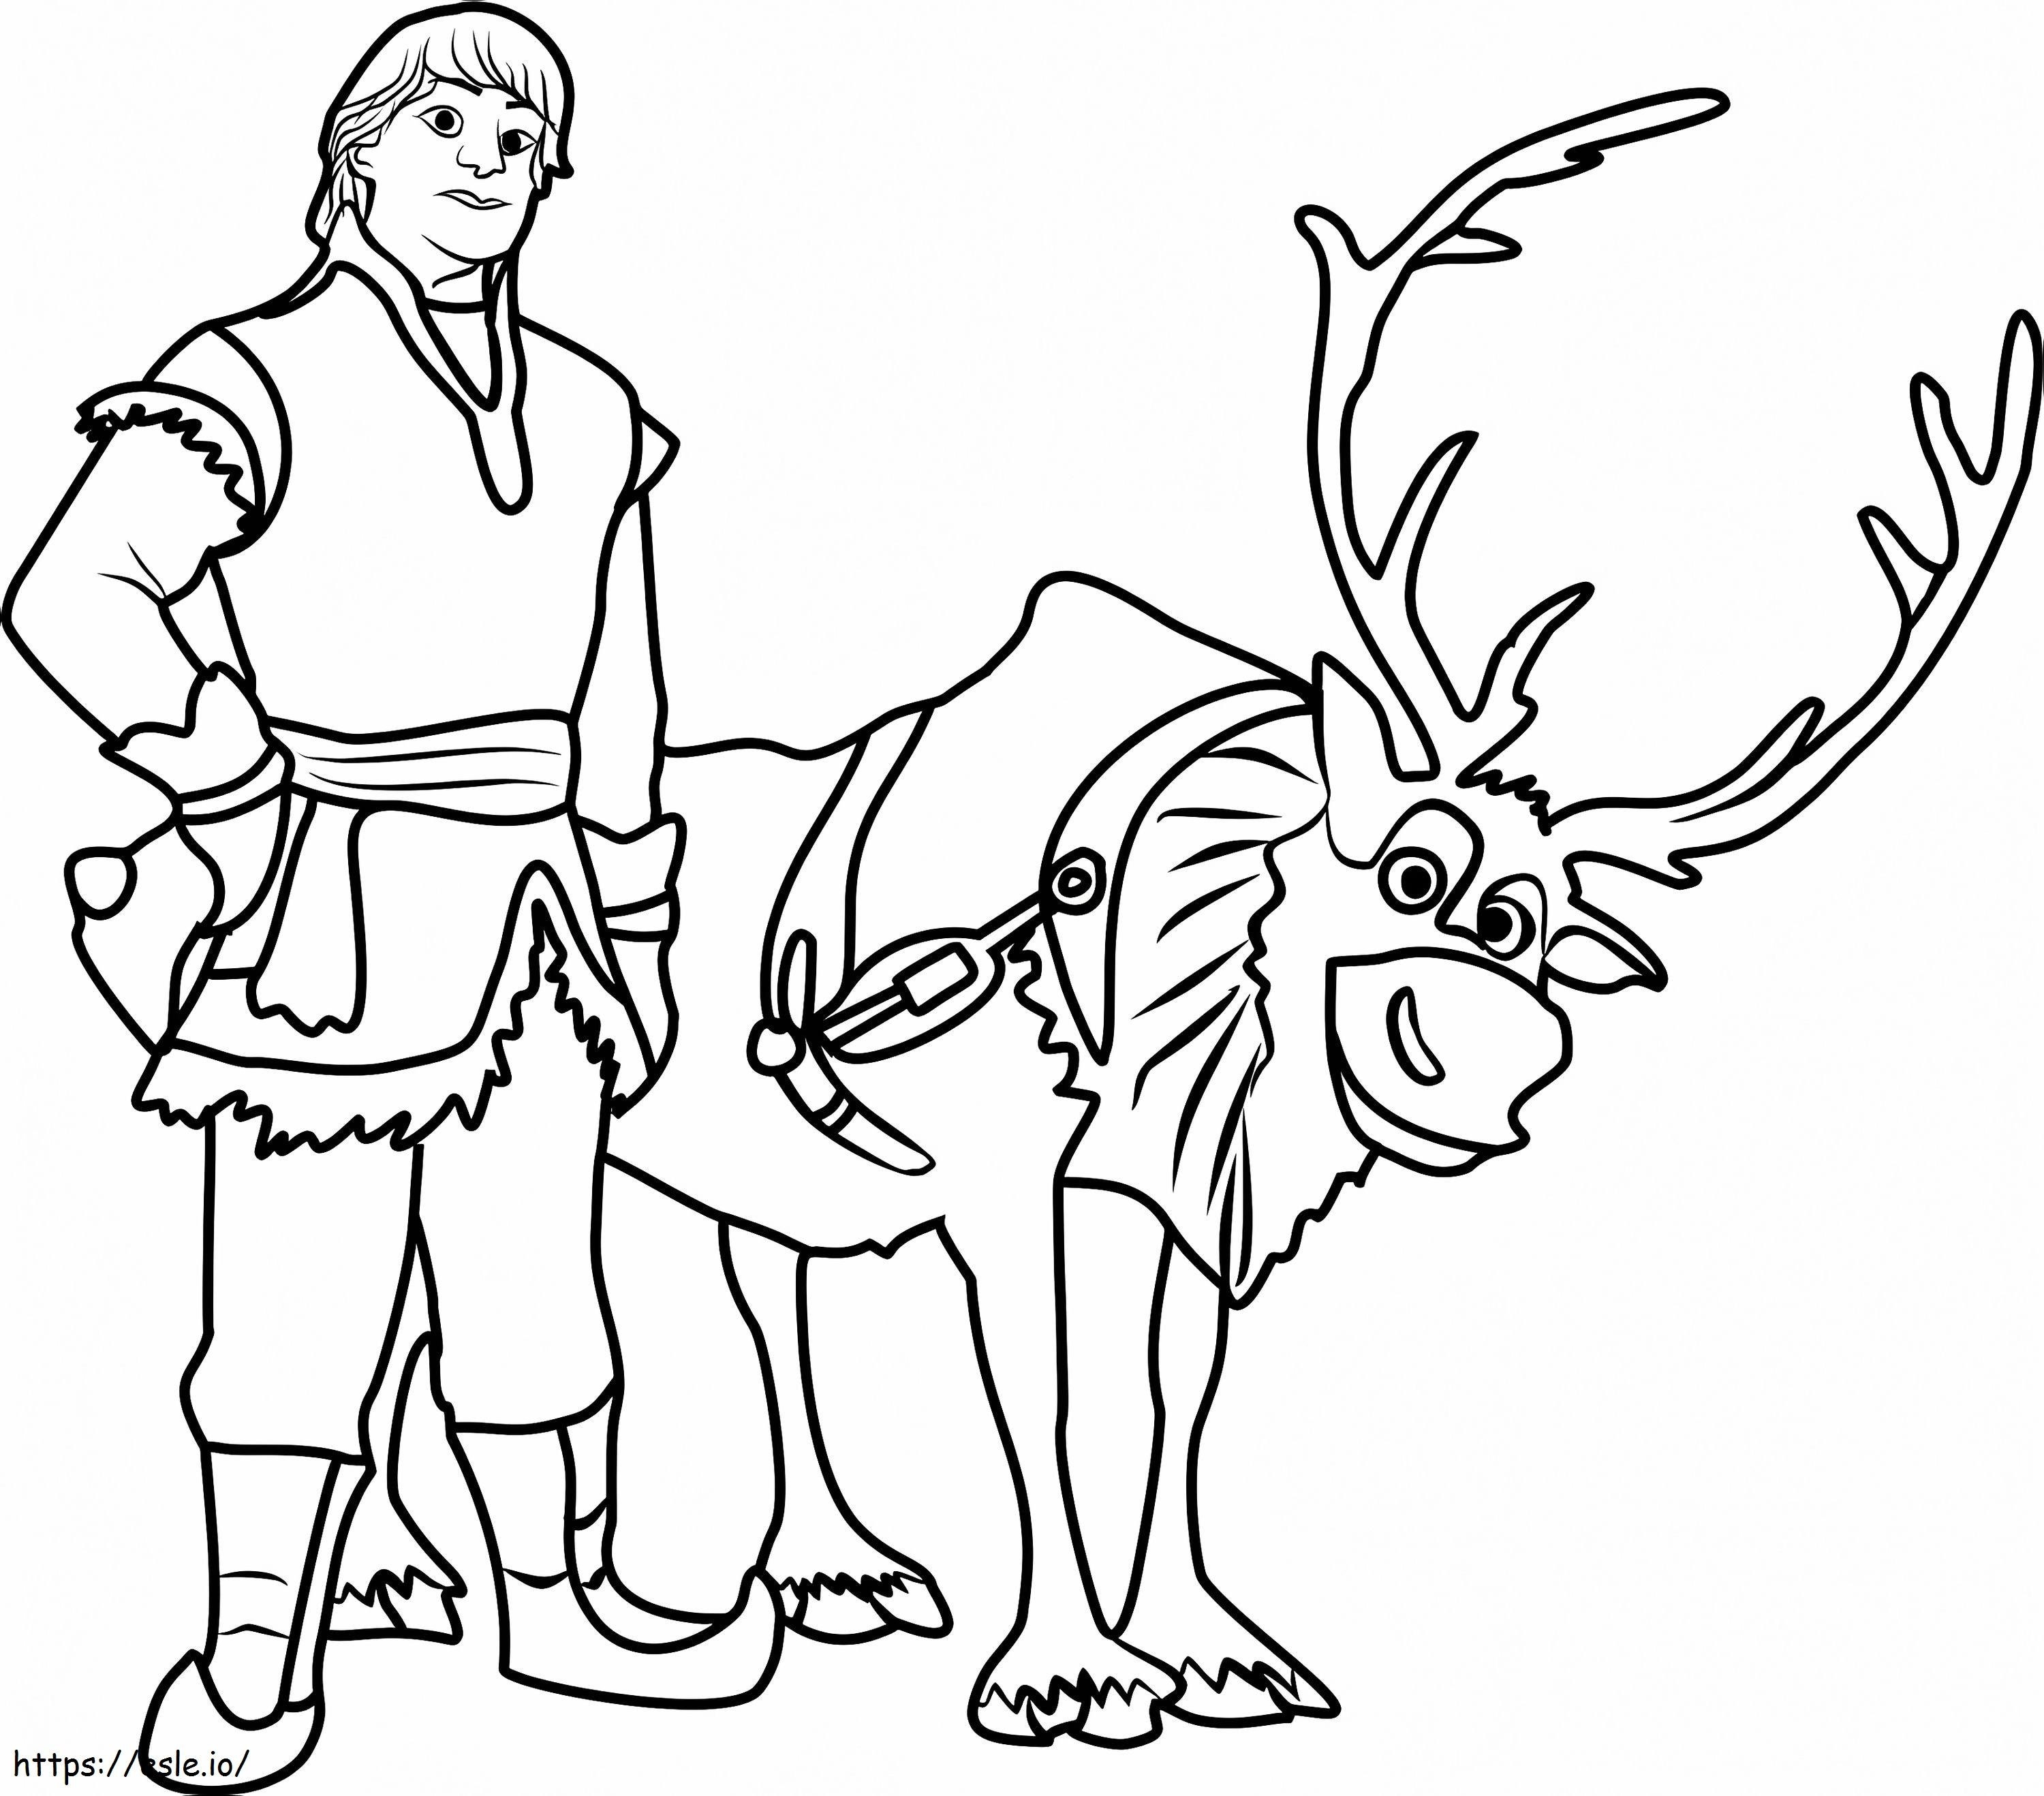 1531535446 Kristoff And Sven A4 coloring page